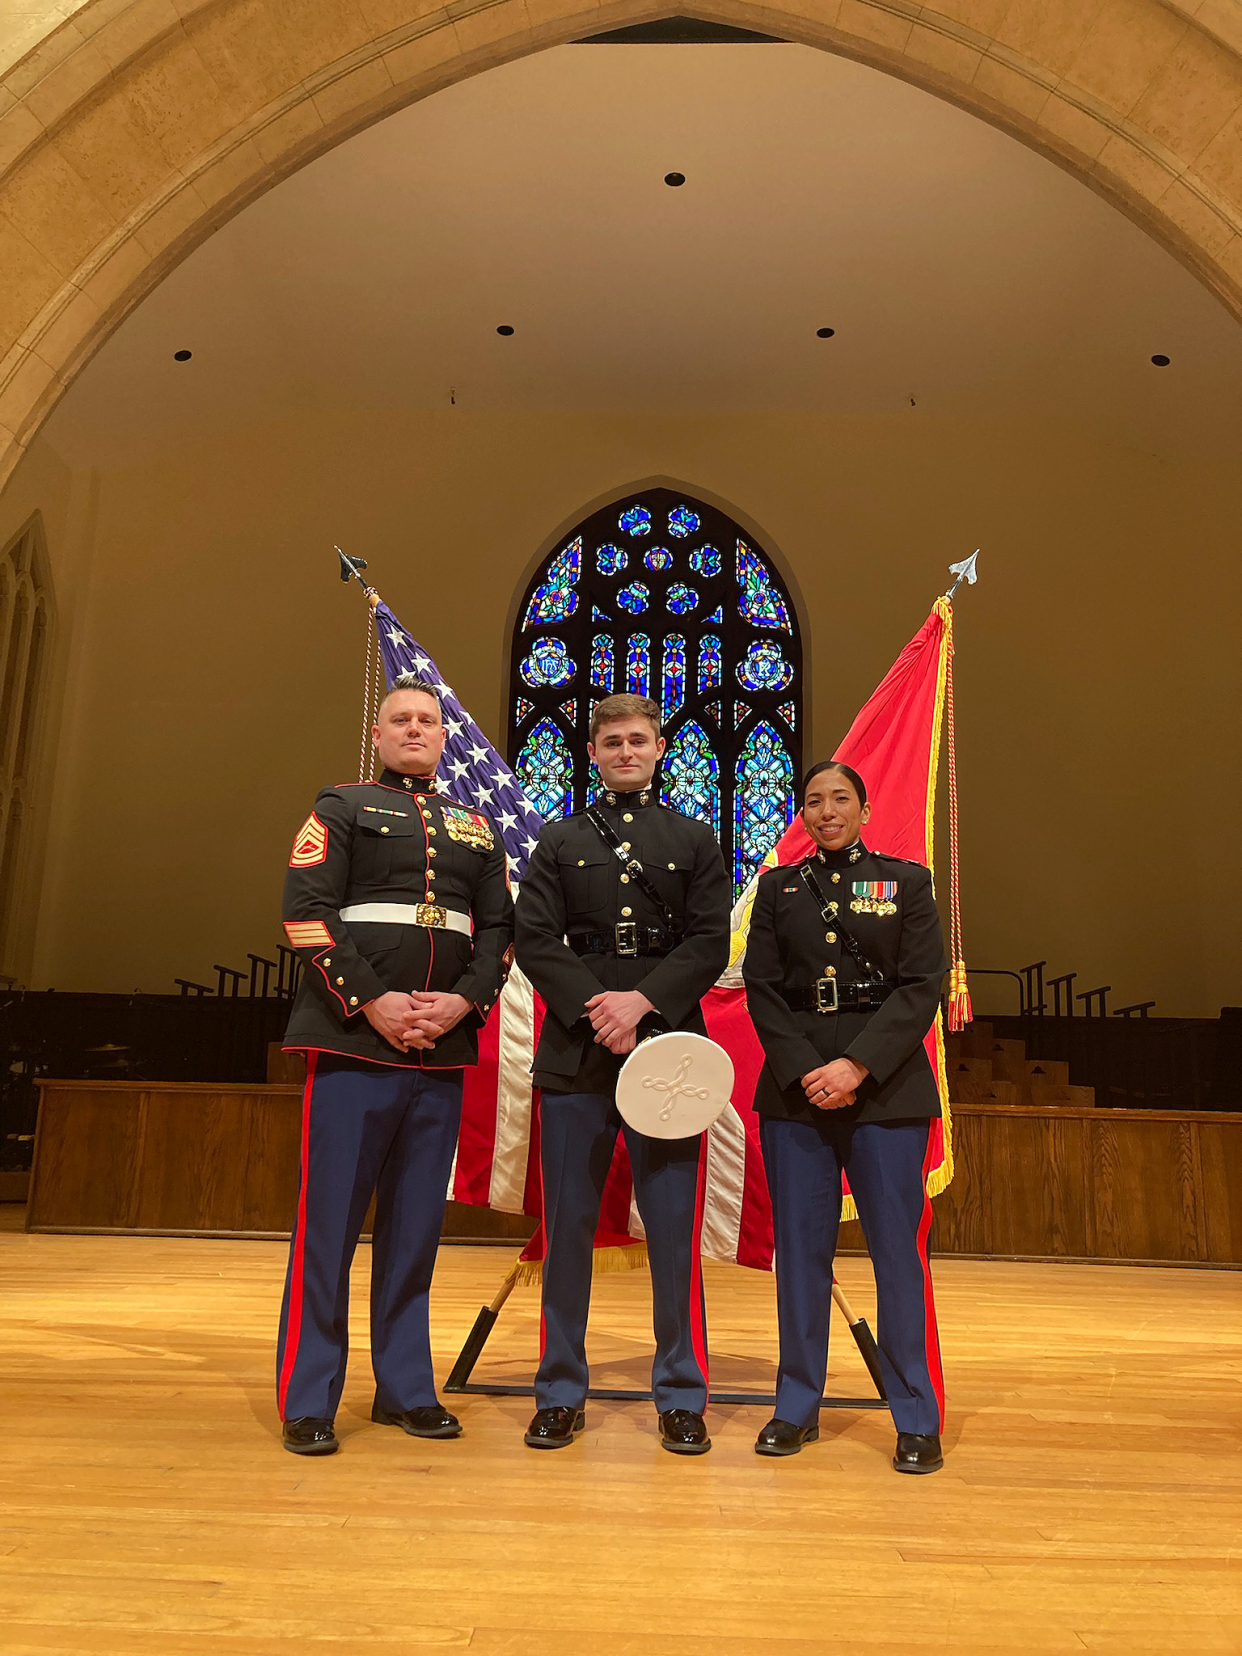 Scott Miklosz (center) is officially commissioned as a Second Lieutenant in the Marines.